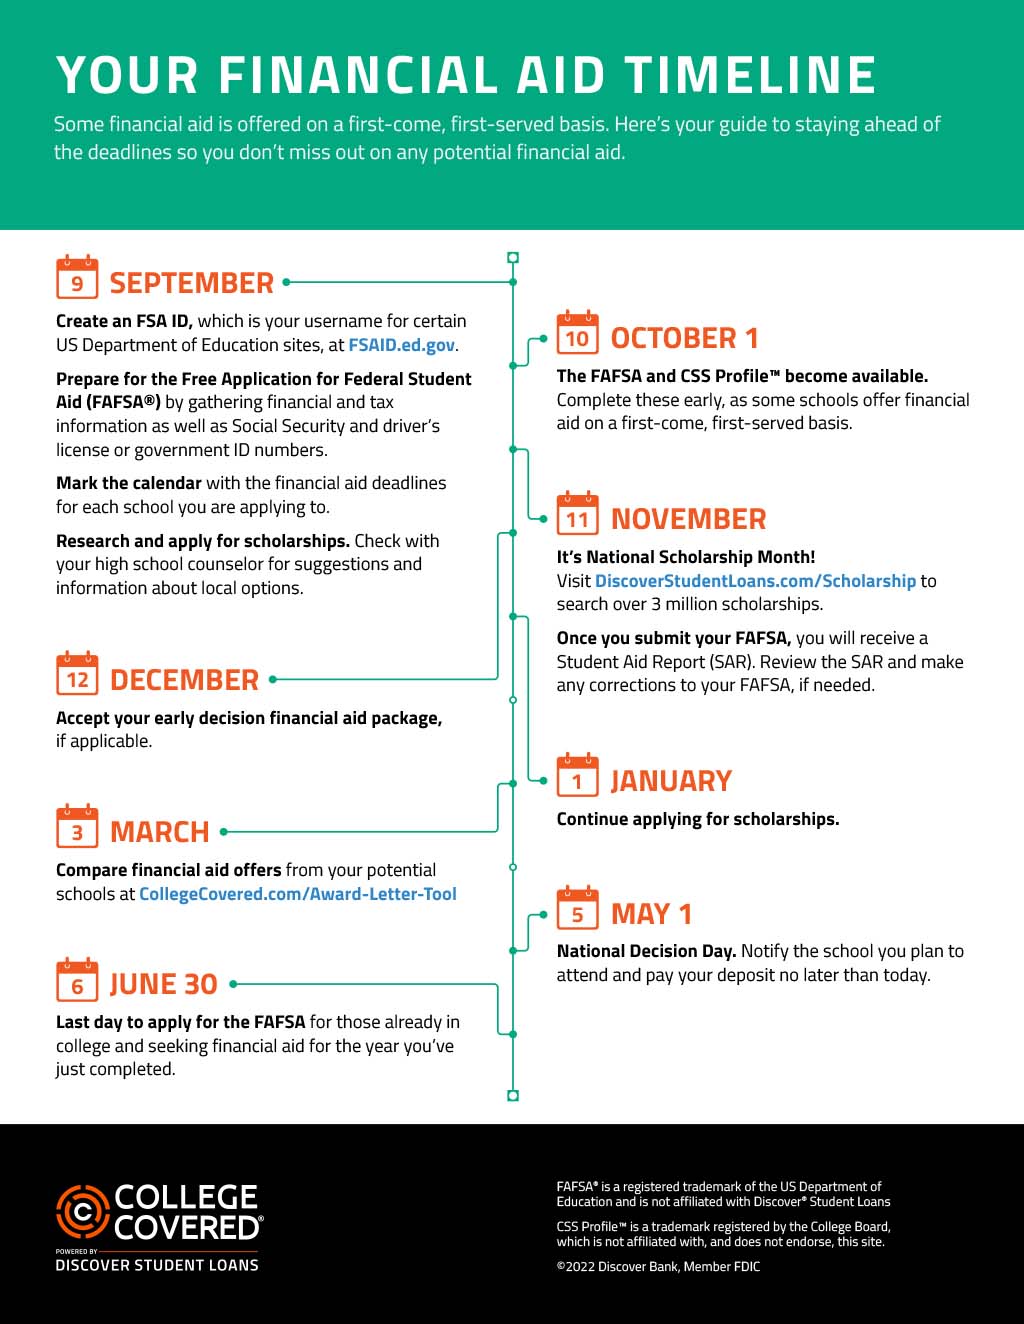 Your Financial Aid Timeline